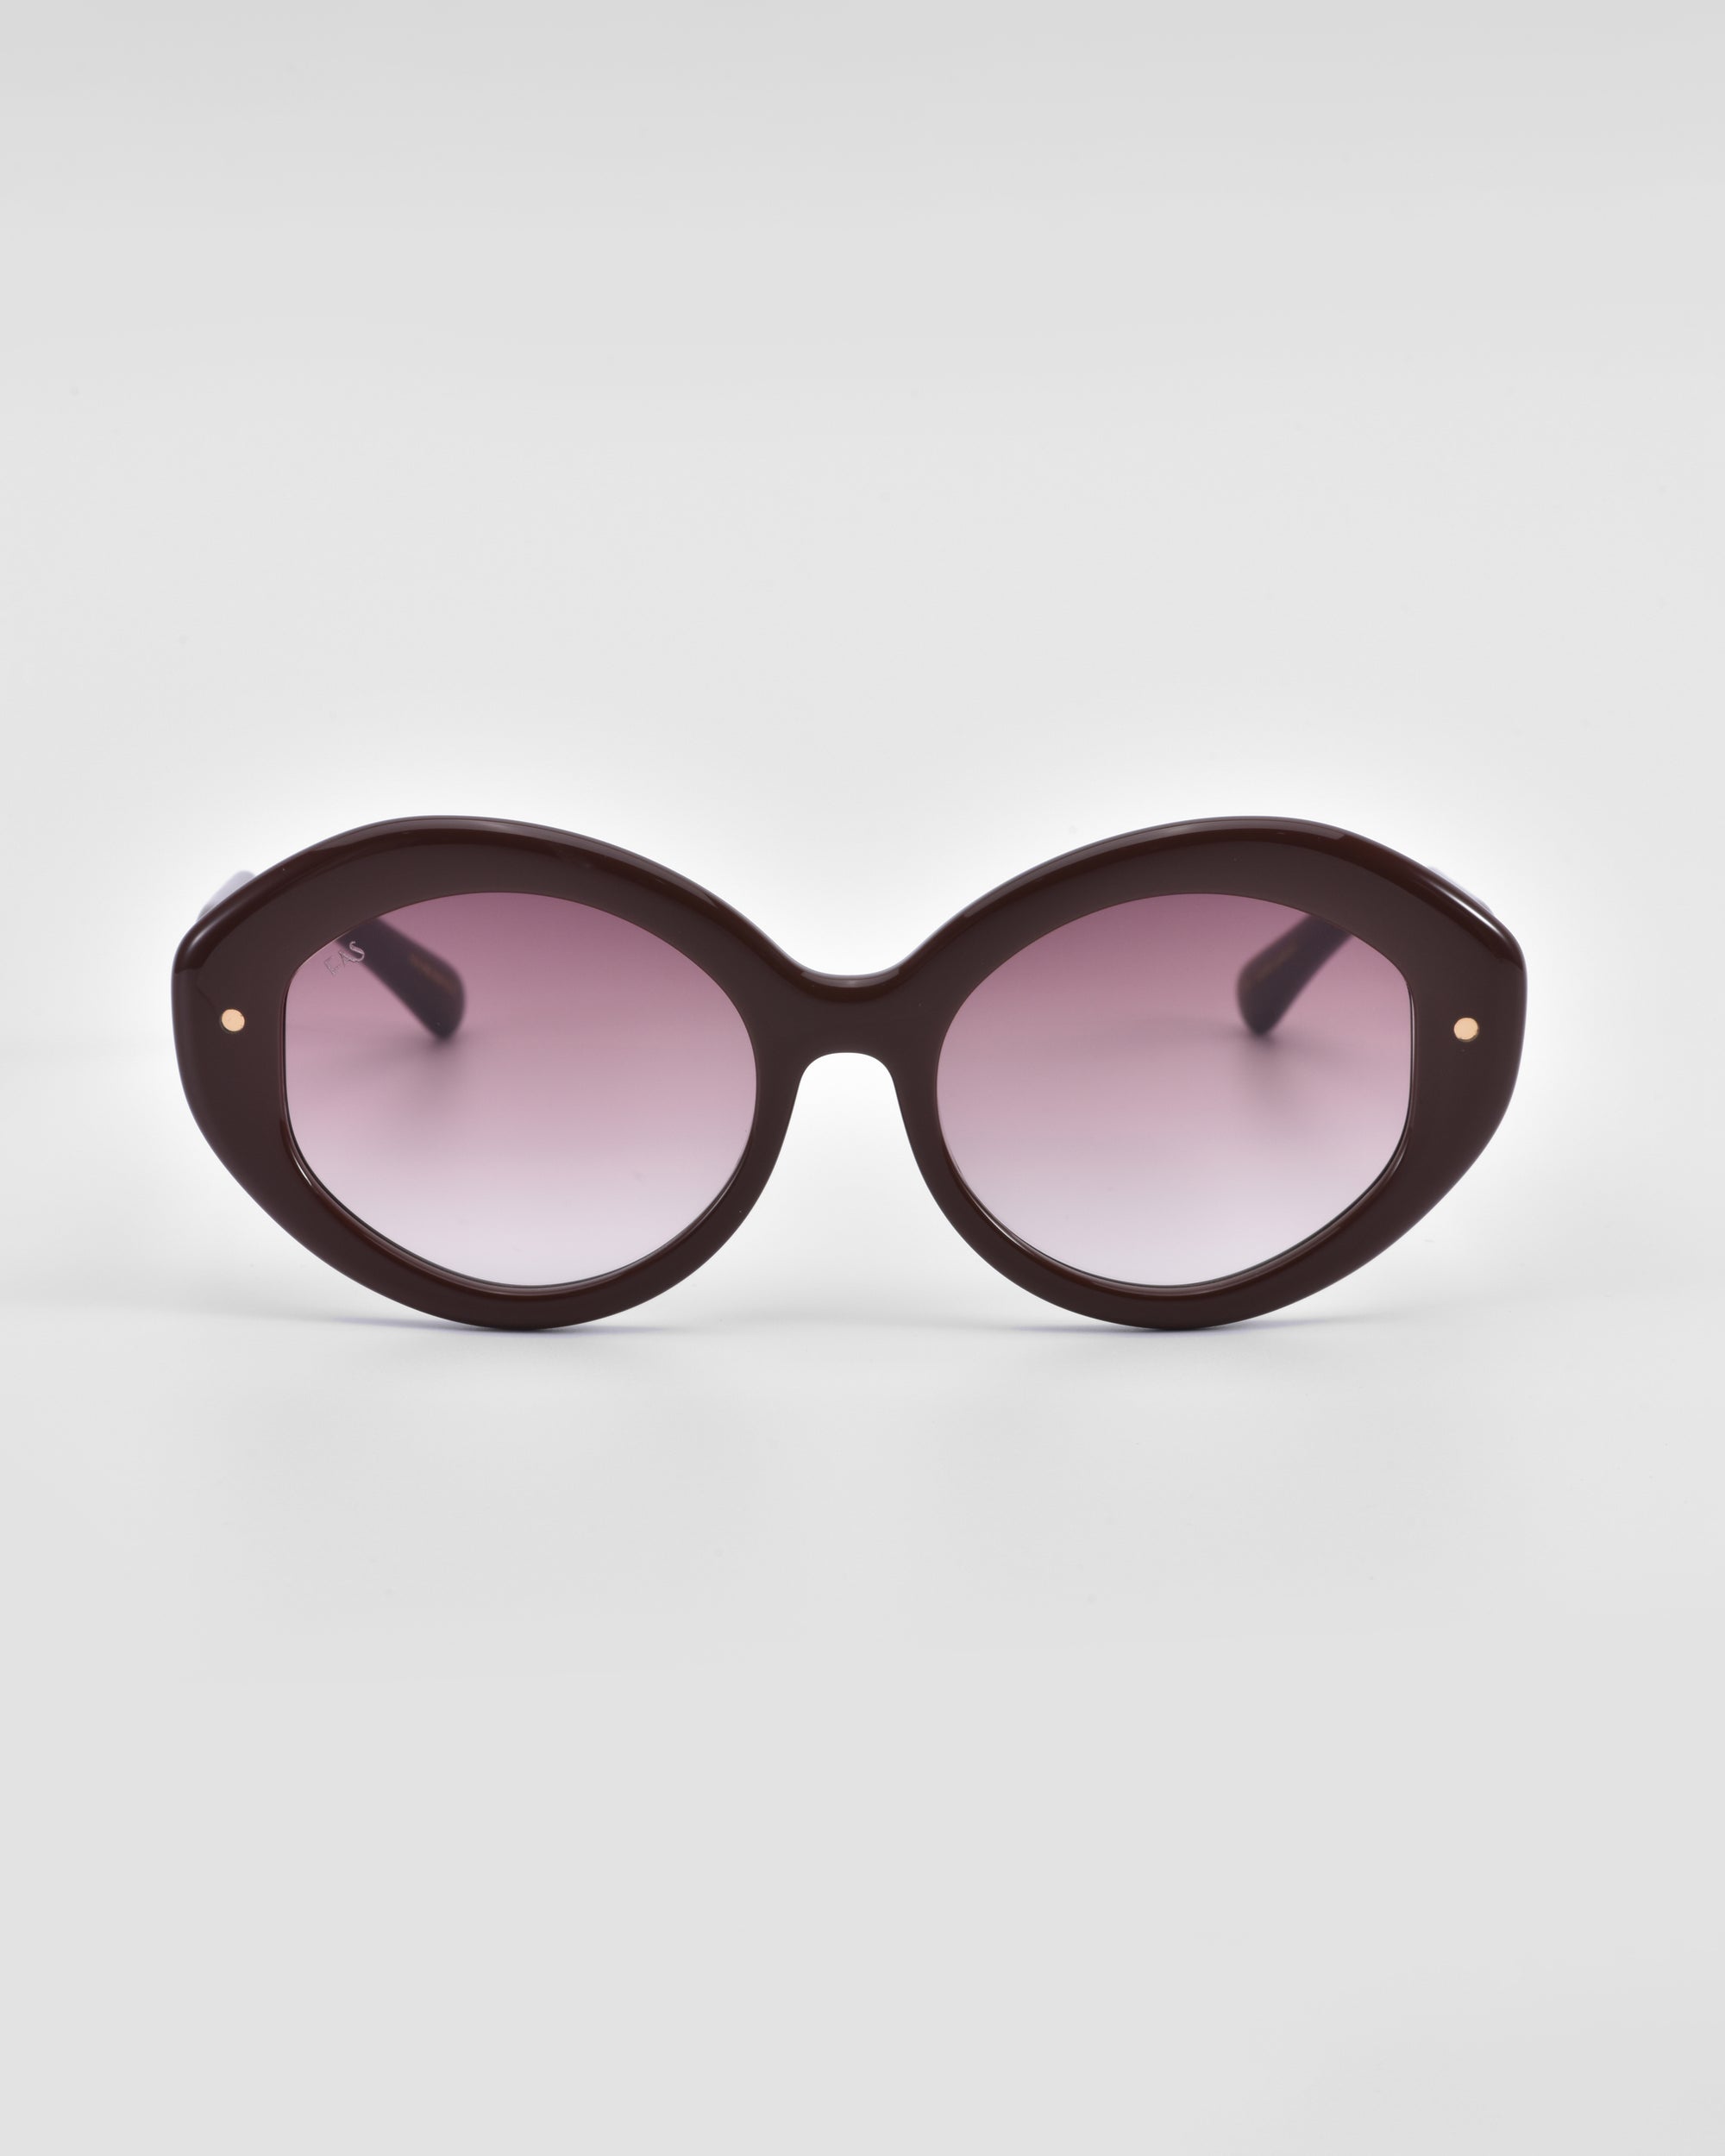 A pair of round, oversized Helios sunglasses with dark purple frames and gradient lenses transitioning from dark at the top to light at the bottom by For Art&#39;s Sake®. This piece of luxury eyewear is set against a plain white background.